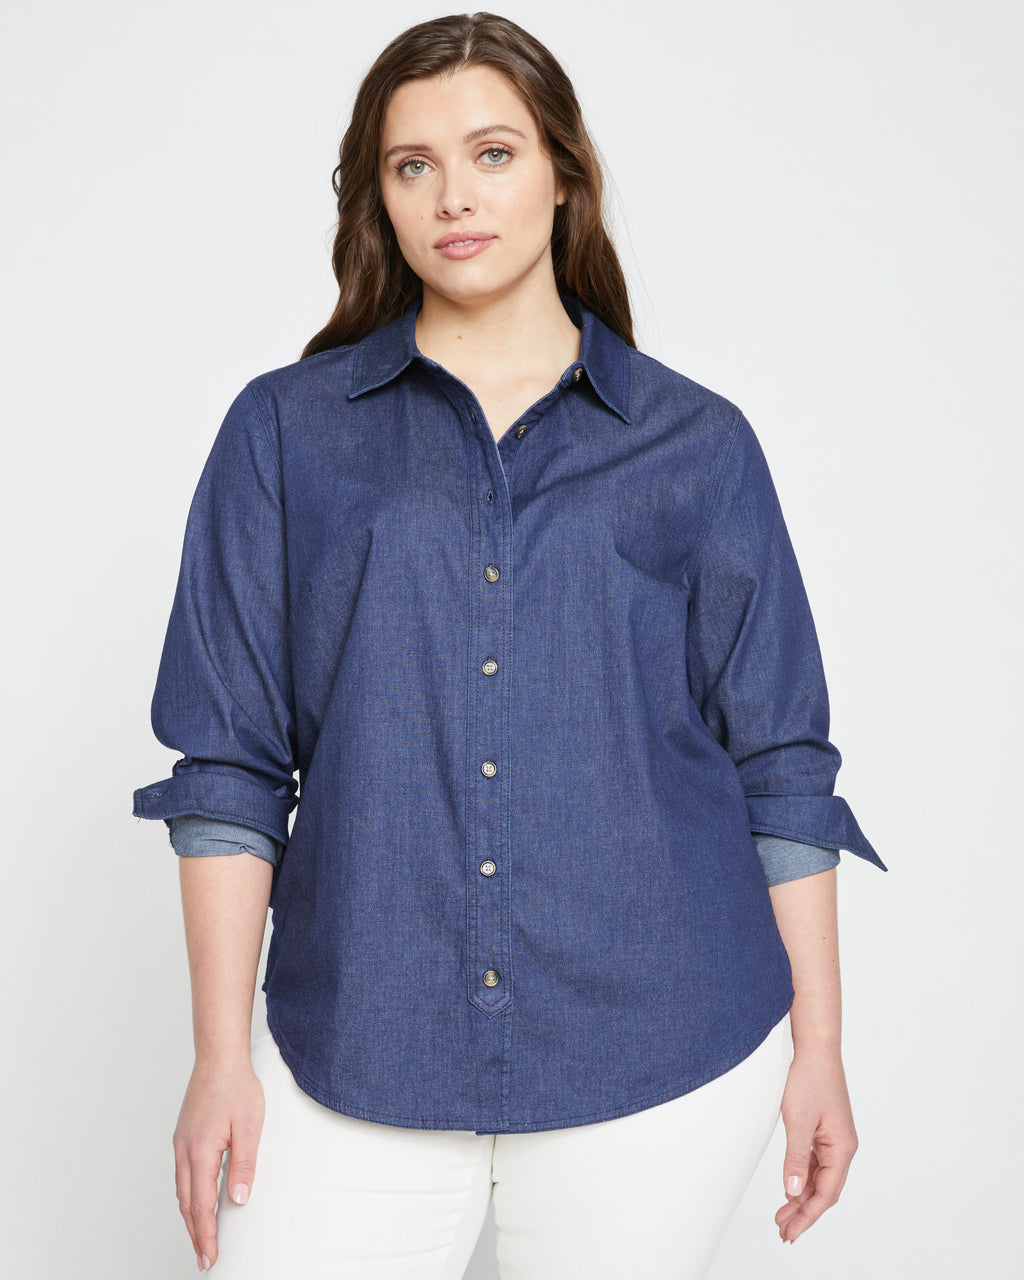 Pepe Jeans Women Washed Casual Blue Shirt - Buy Pepe Jeans Women Washed  Casual Blue Shirt Online at Best Prices in India | Flipkart.com